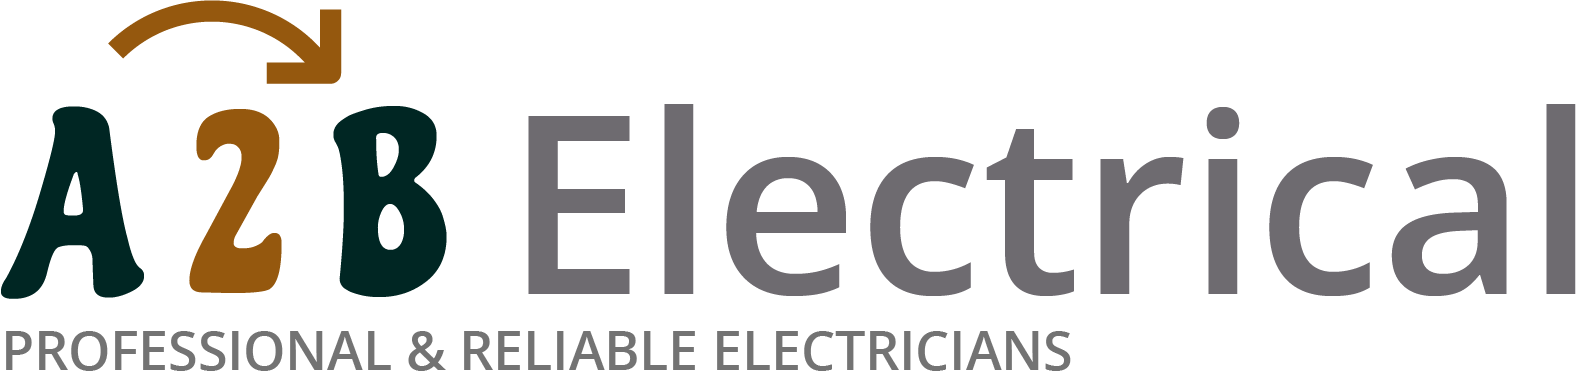 If you have electrical wiring problems in Loughborough, we can provide an electrician to have a look for you. 